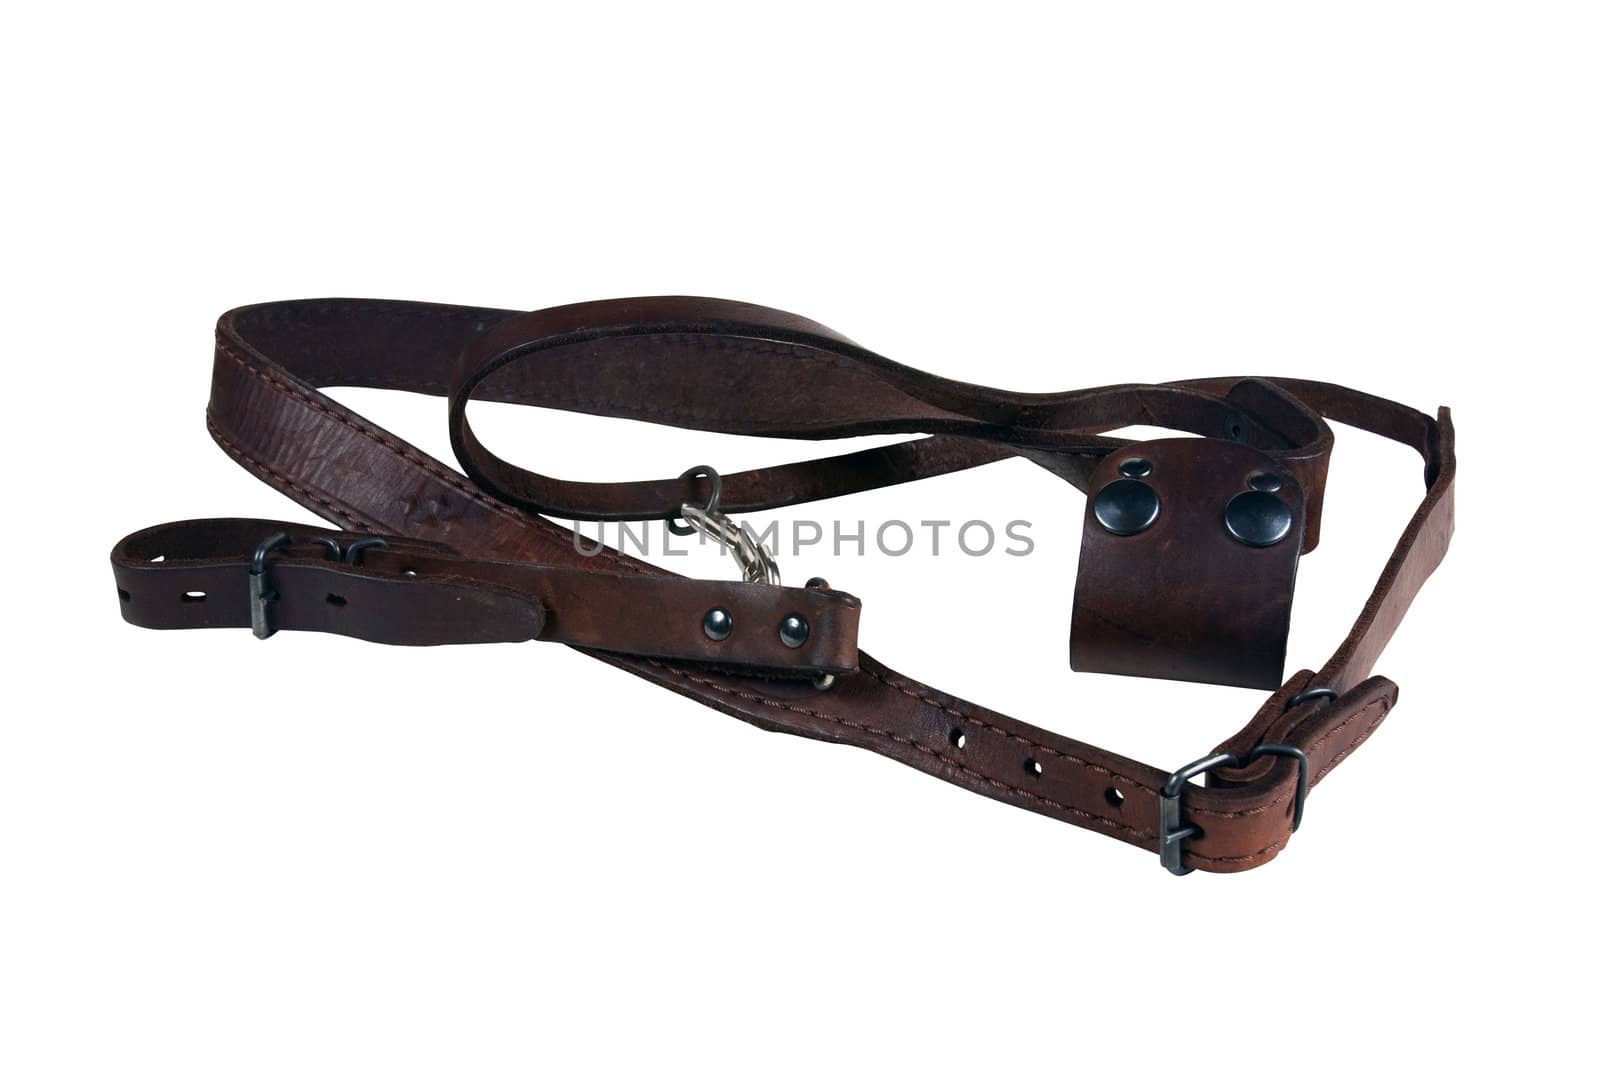 Strap for a hunting rifle isolated on white with clipping path